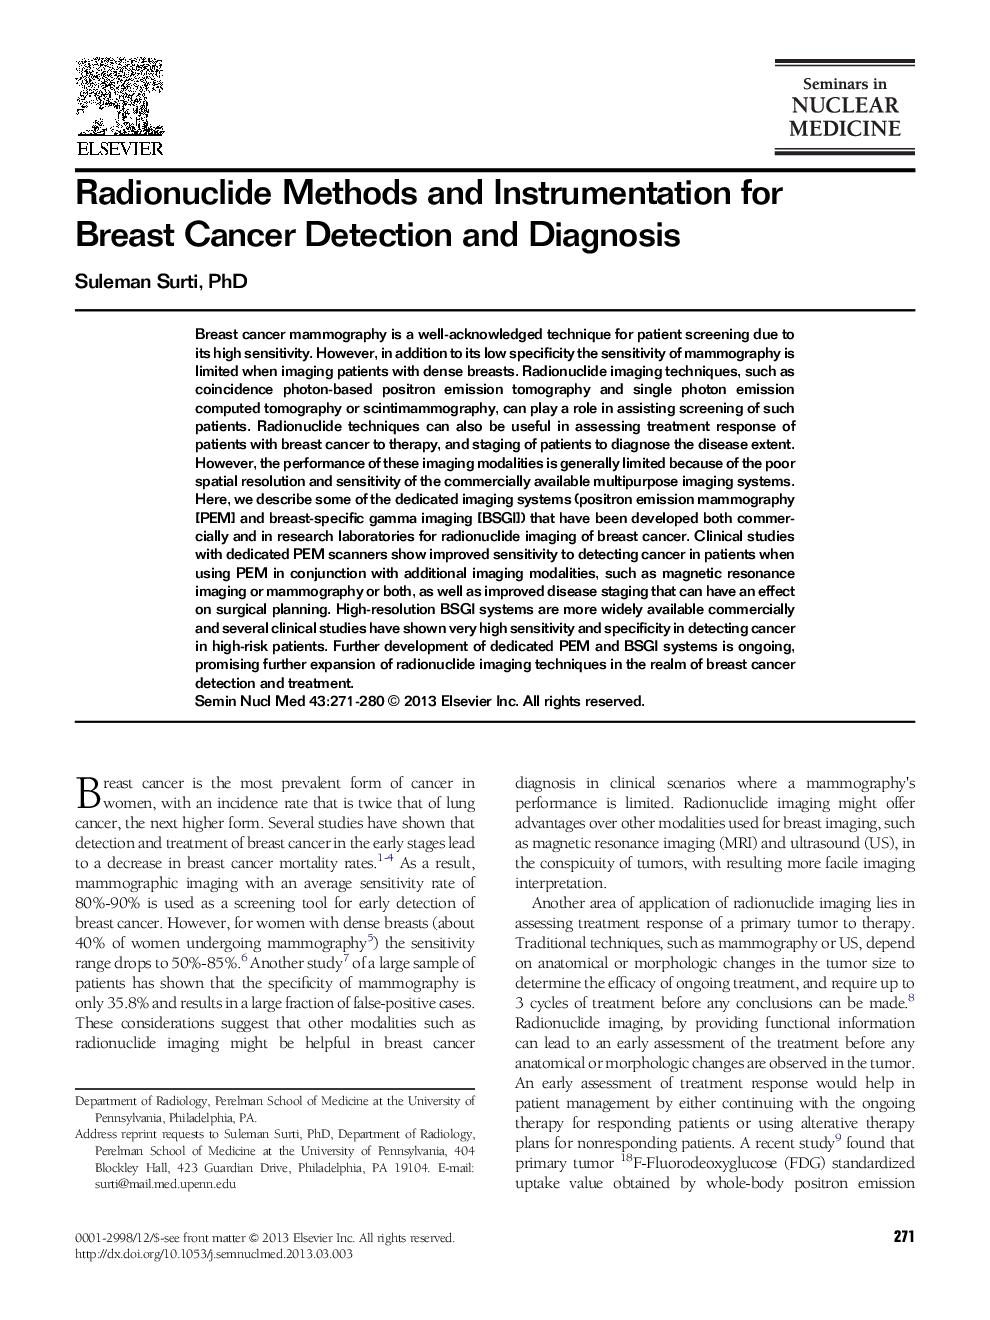 Radionuclide Methods and Instrumentation for Breast Cancer Detection and Diagnosis